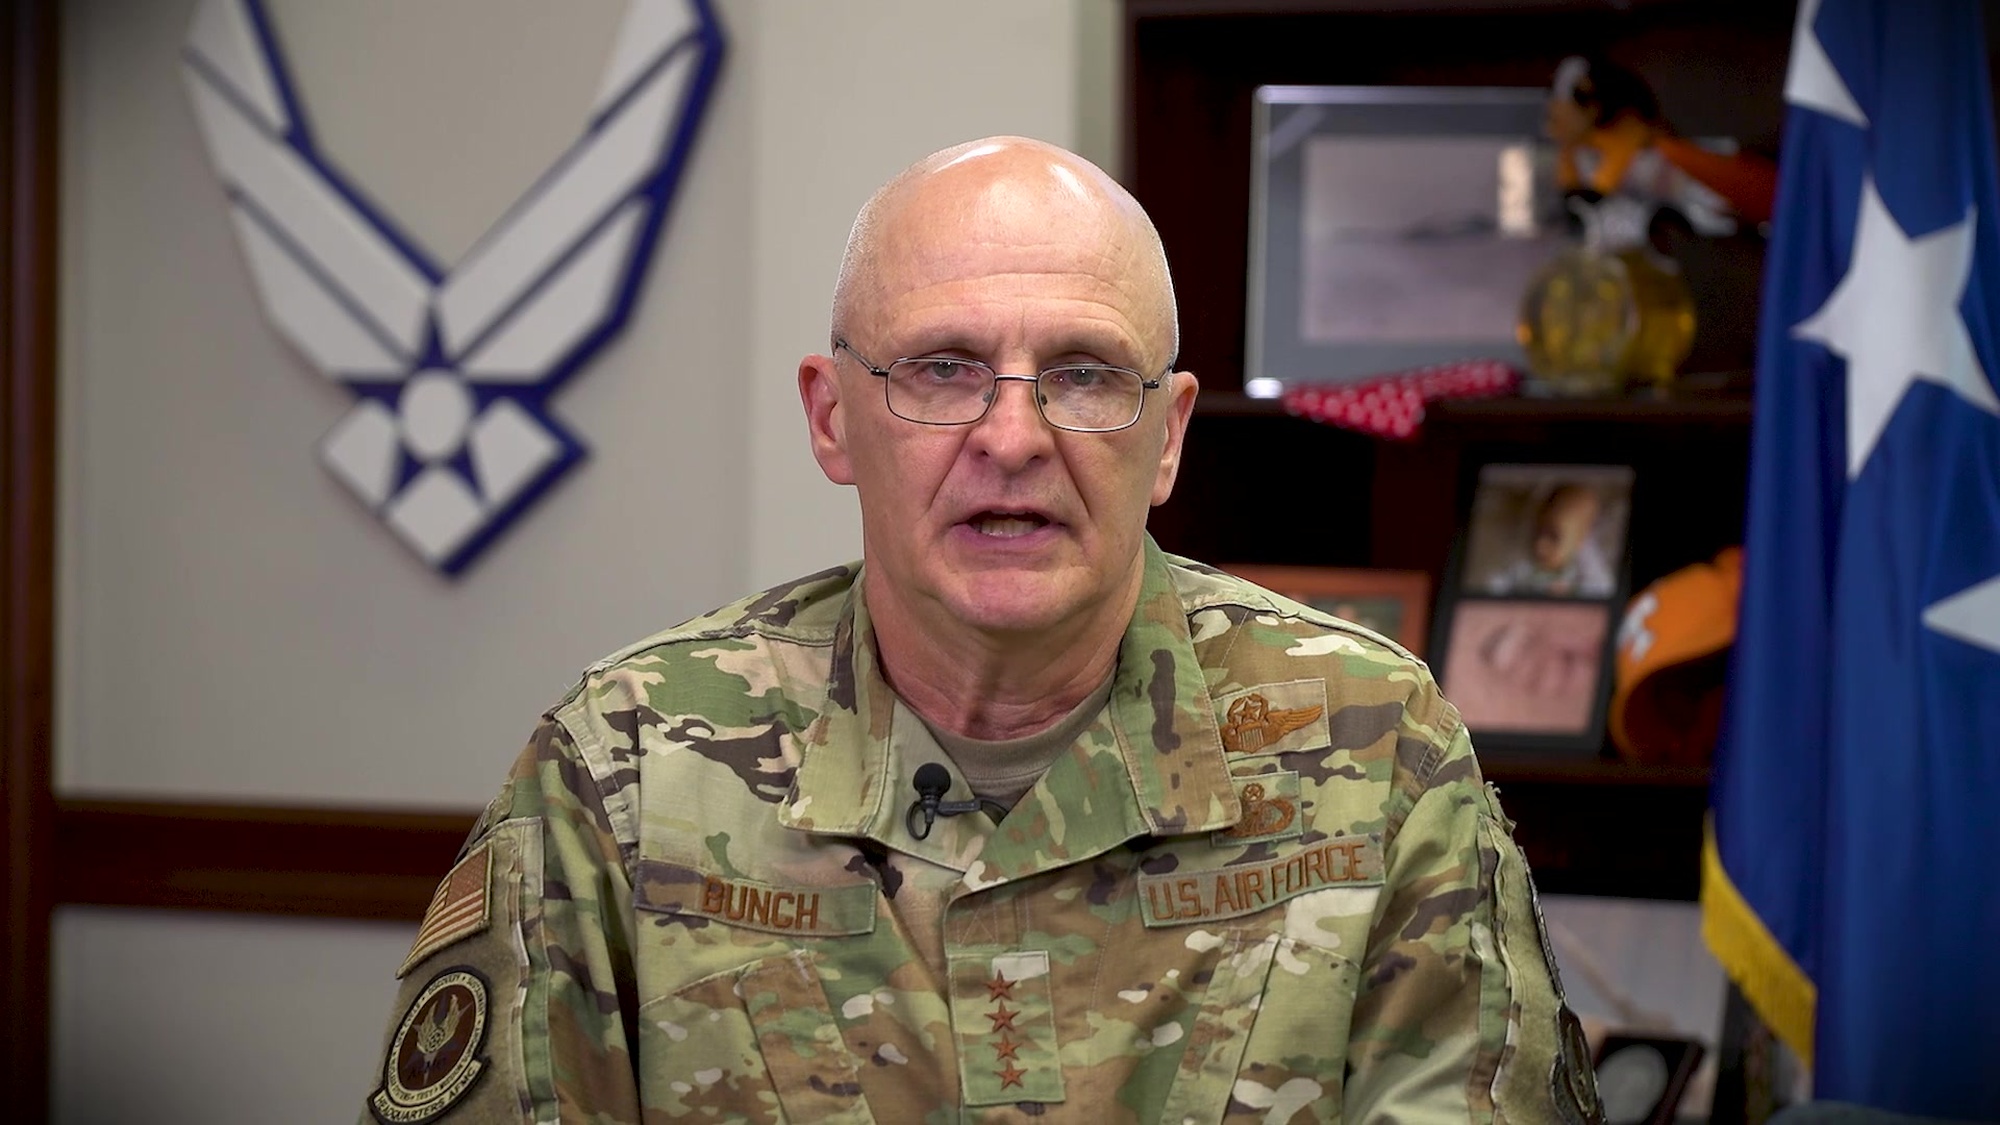 Gen. Arnold W. Bunch Jr., Air Force Materiel Command Commander, addresses the workforce on diversity and inclusion, Wright-Patterson Air Force Base, Ohio, June 10, 2020. (U.S. Air Force video by Christopher Decker)